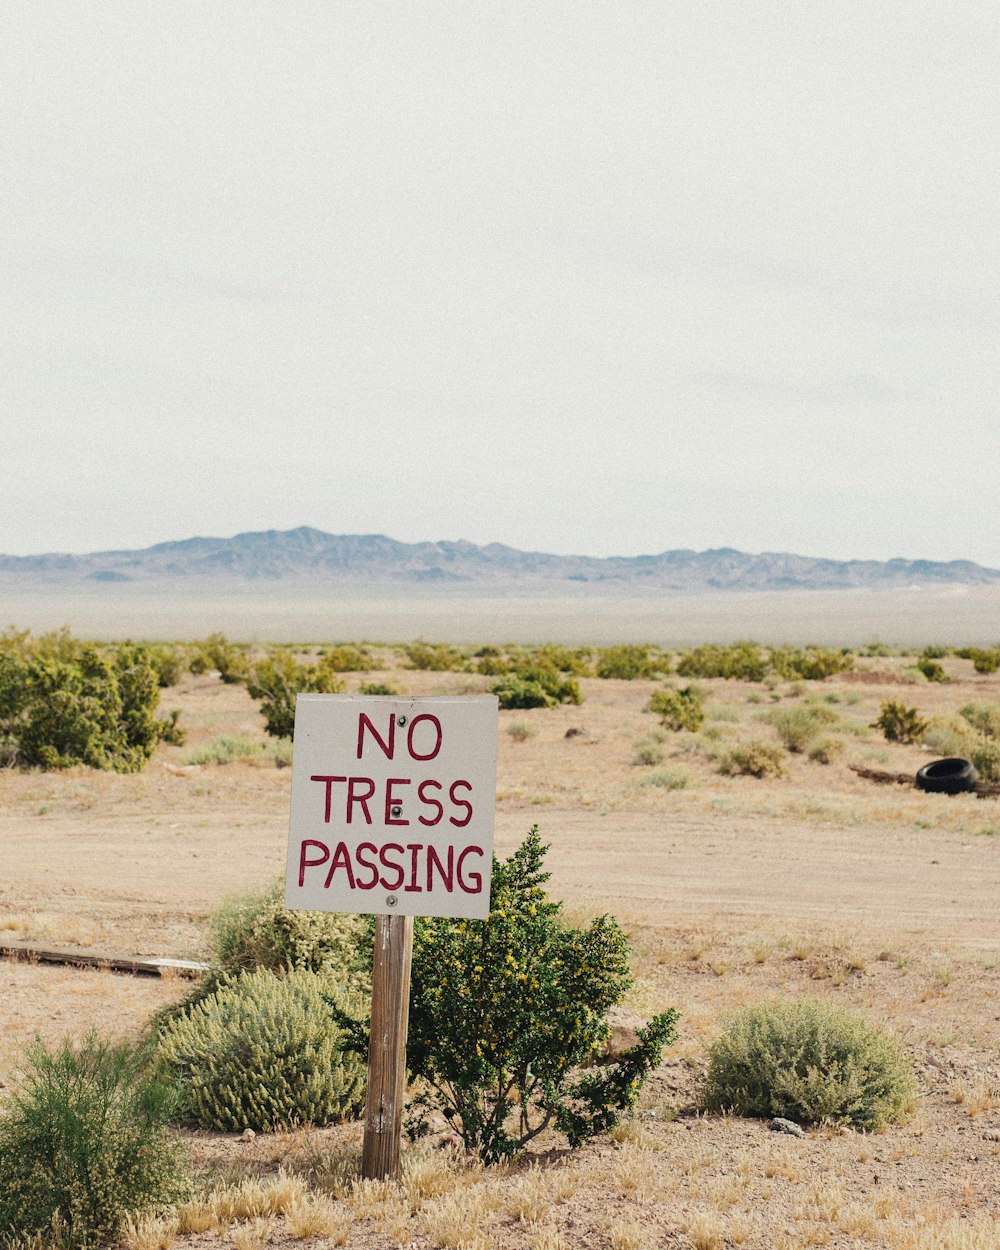 a no tress passing sign in the middle of nowhere